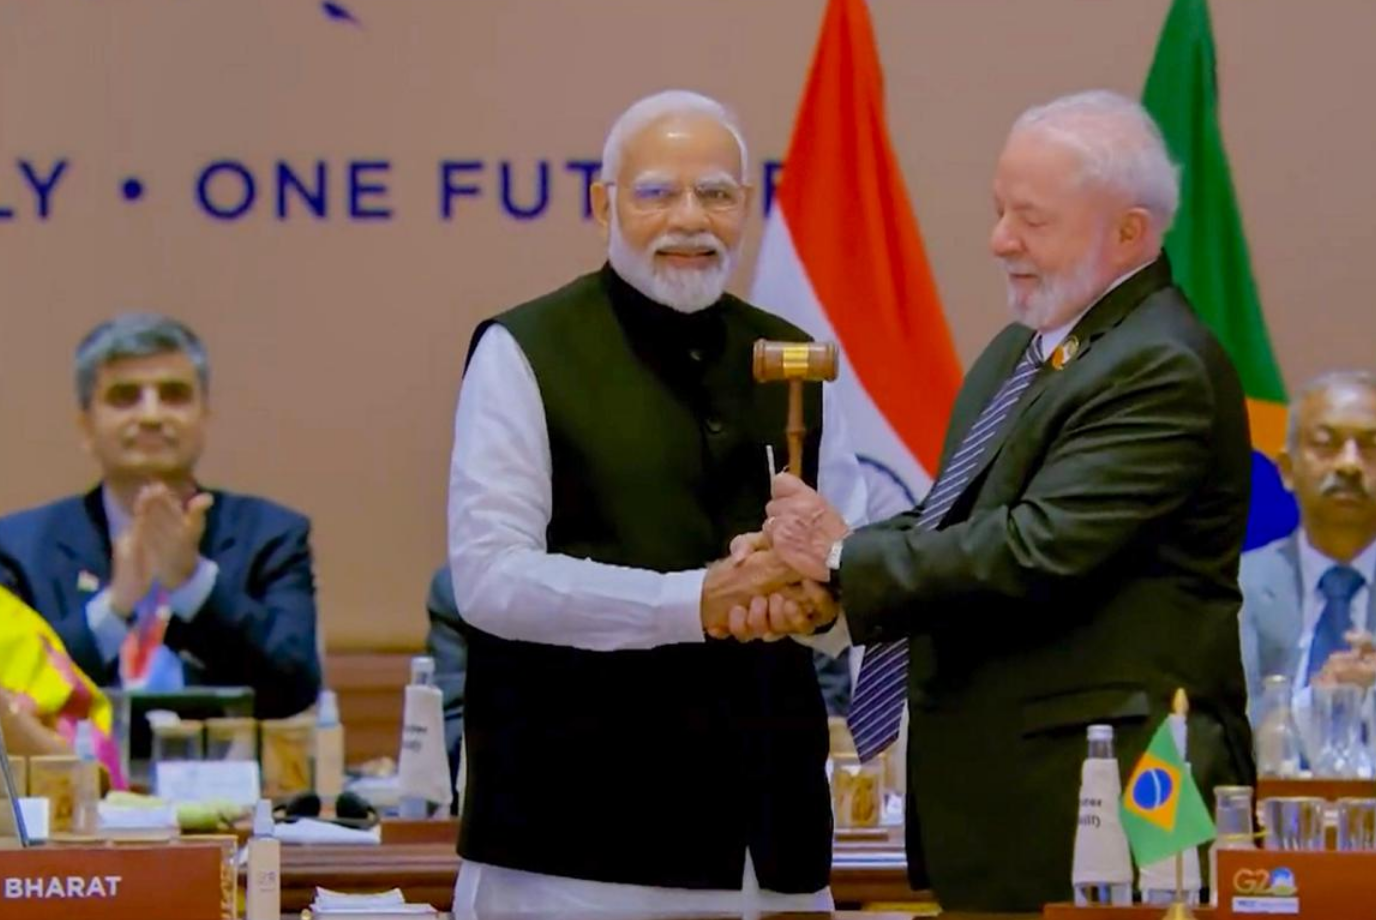 PM Modi Concludes G20 Summit, Passes on the ‘One Earth, One Family’ Baton to Brazil